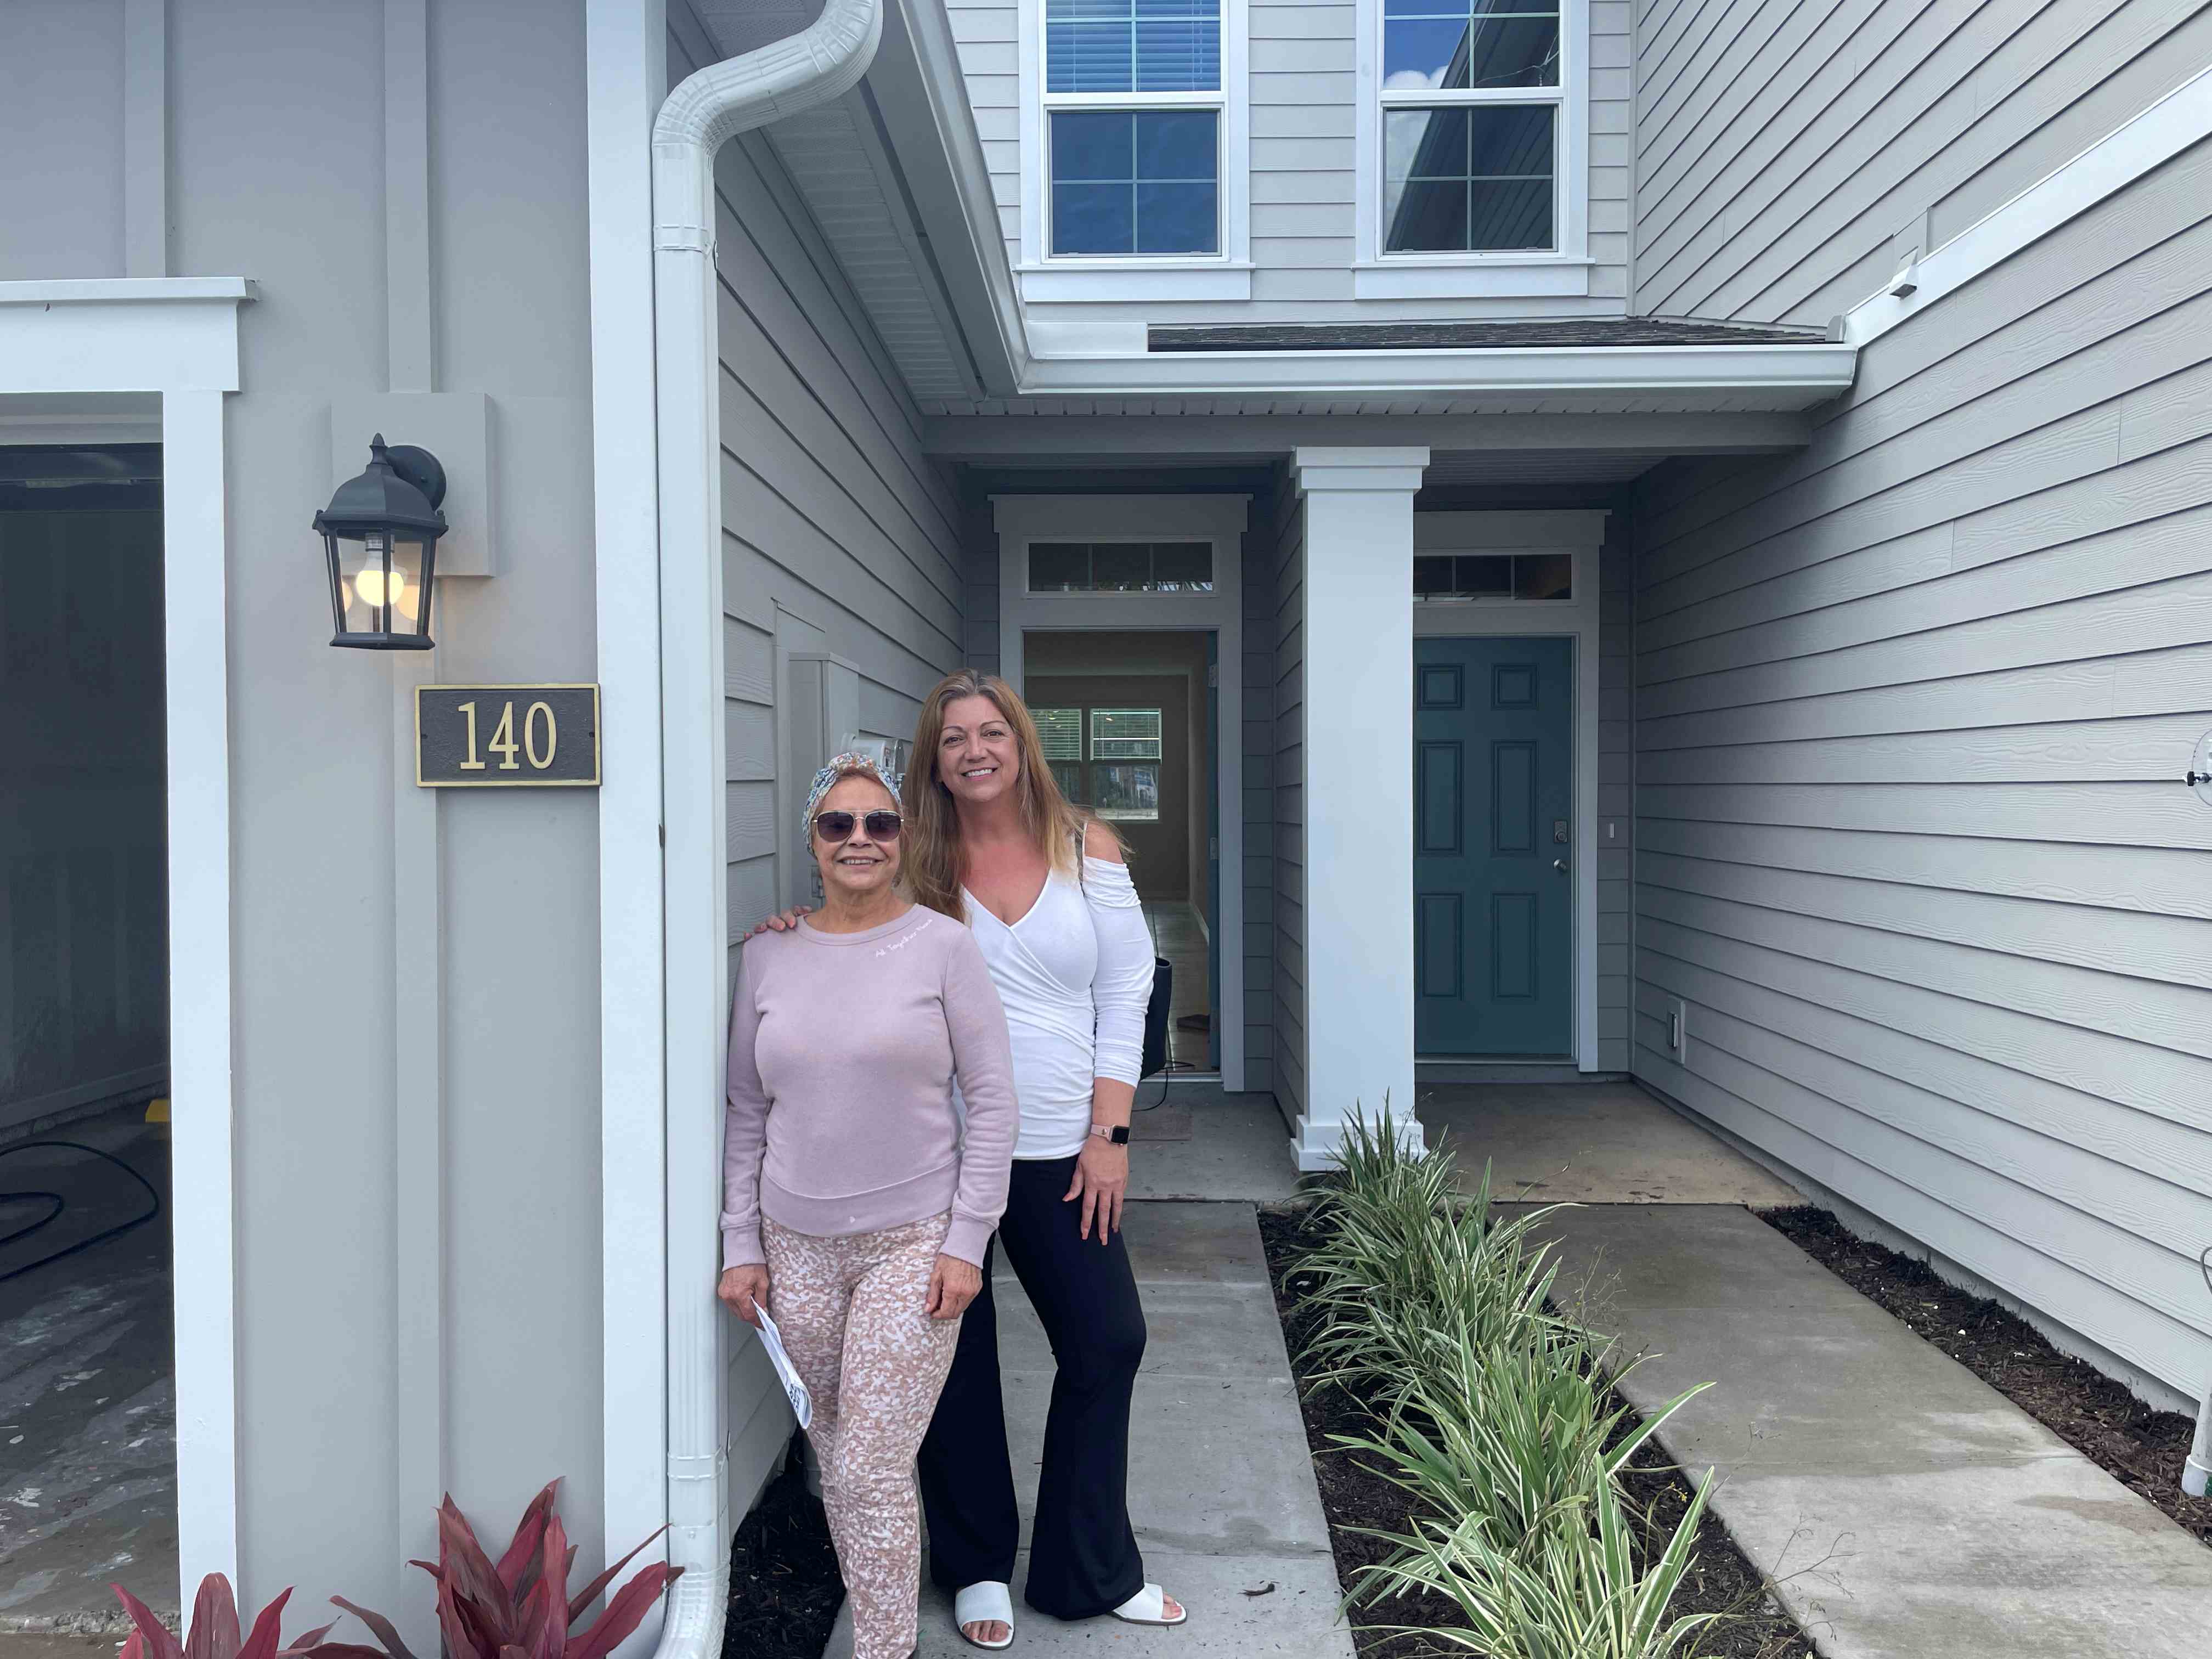 Suzanne with her client outside a brand new townhome